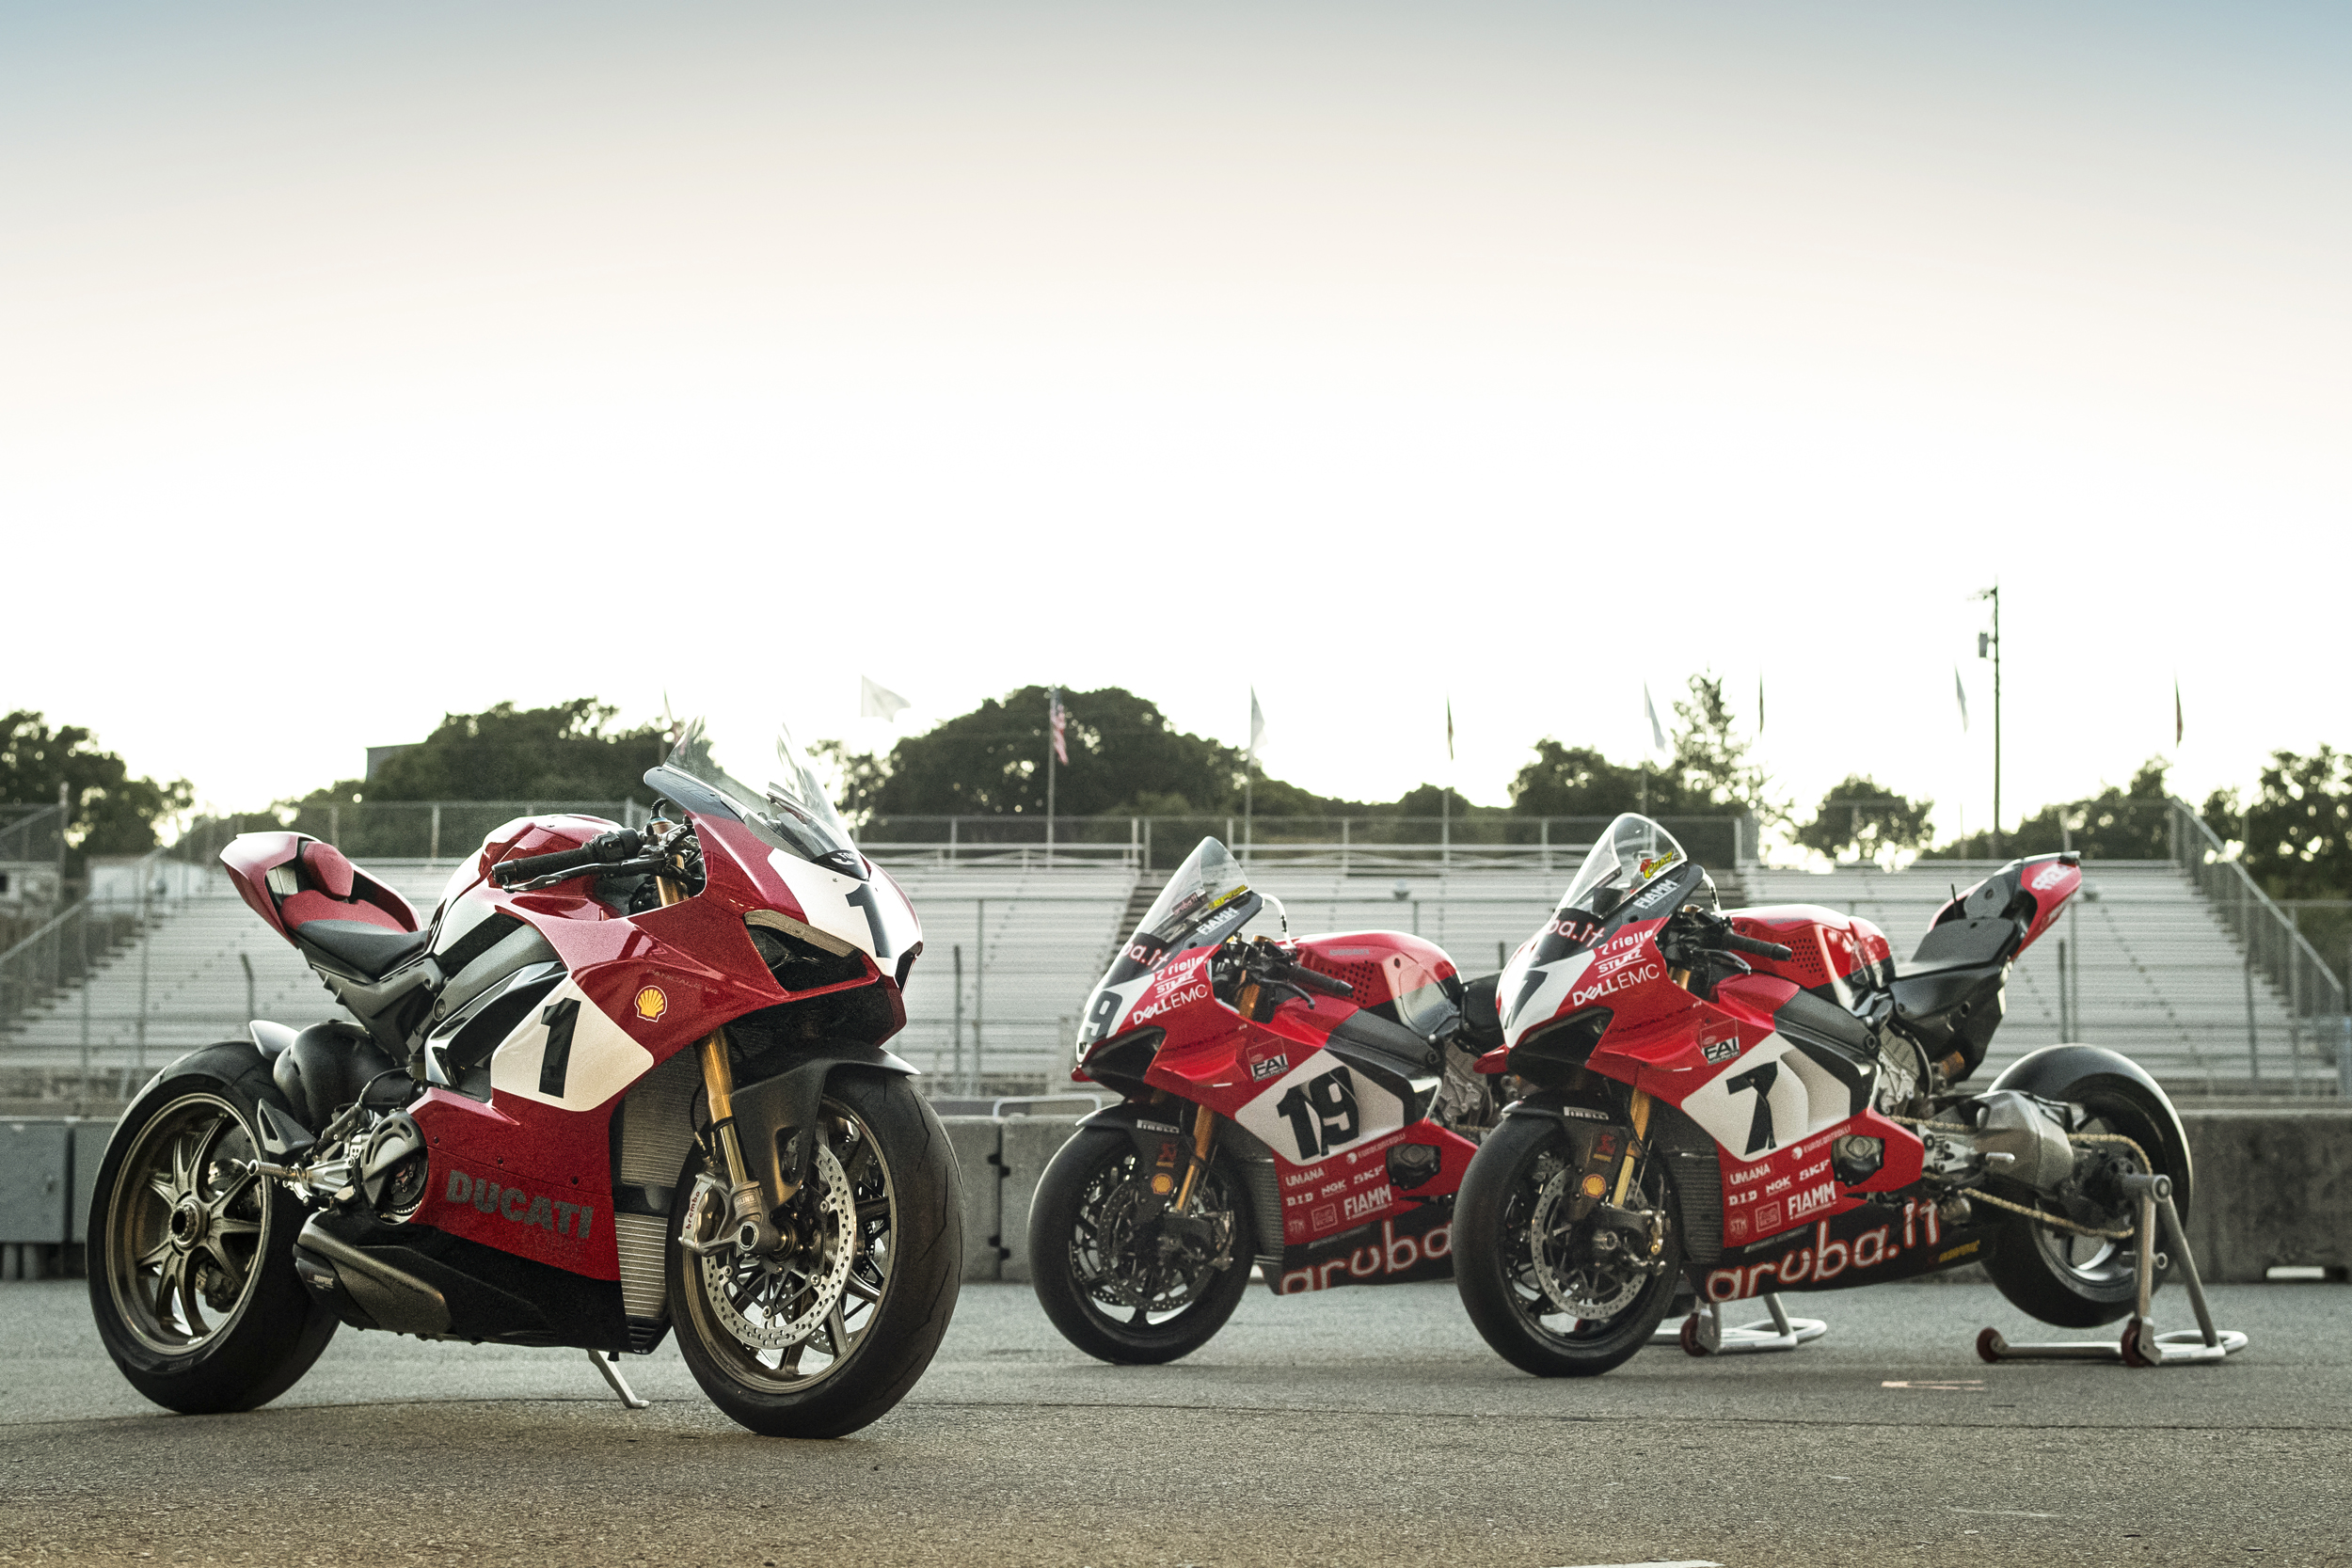 190905 Panigale V4 25° Anniversario 916 to be Auctioned for Carlin Dunne Foundation [2]